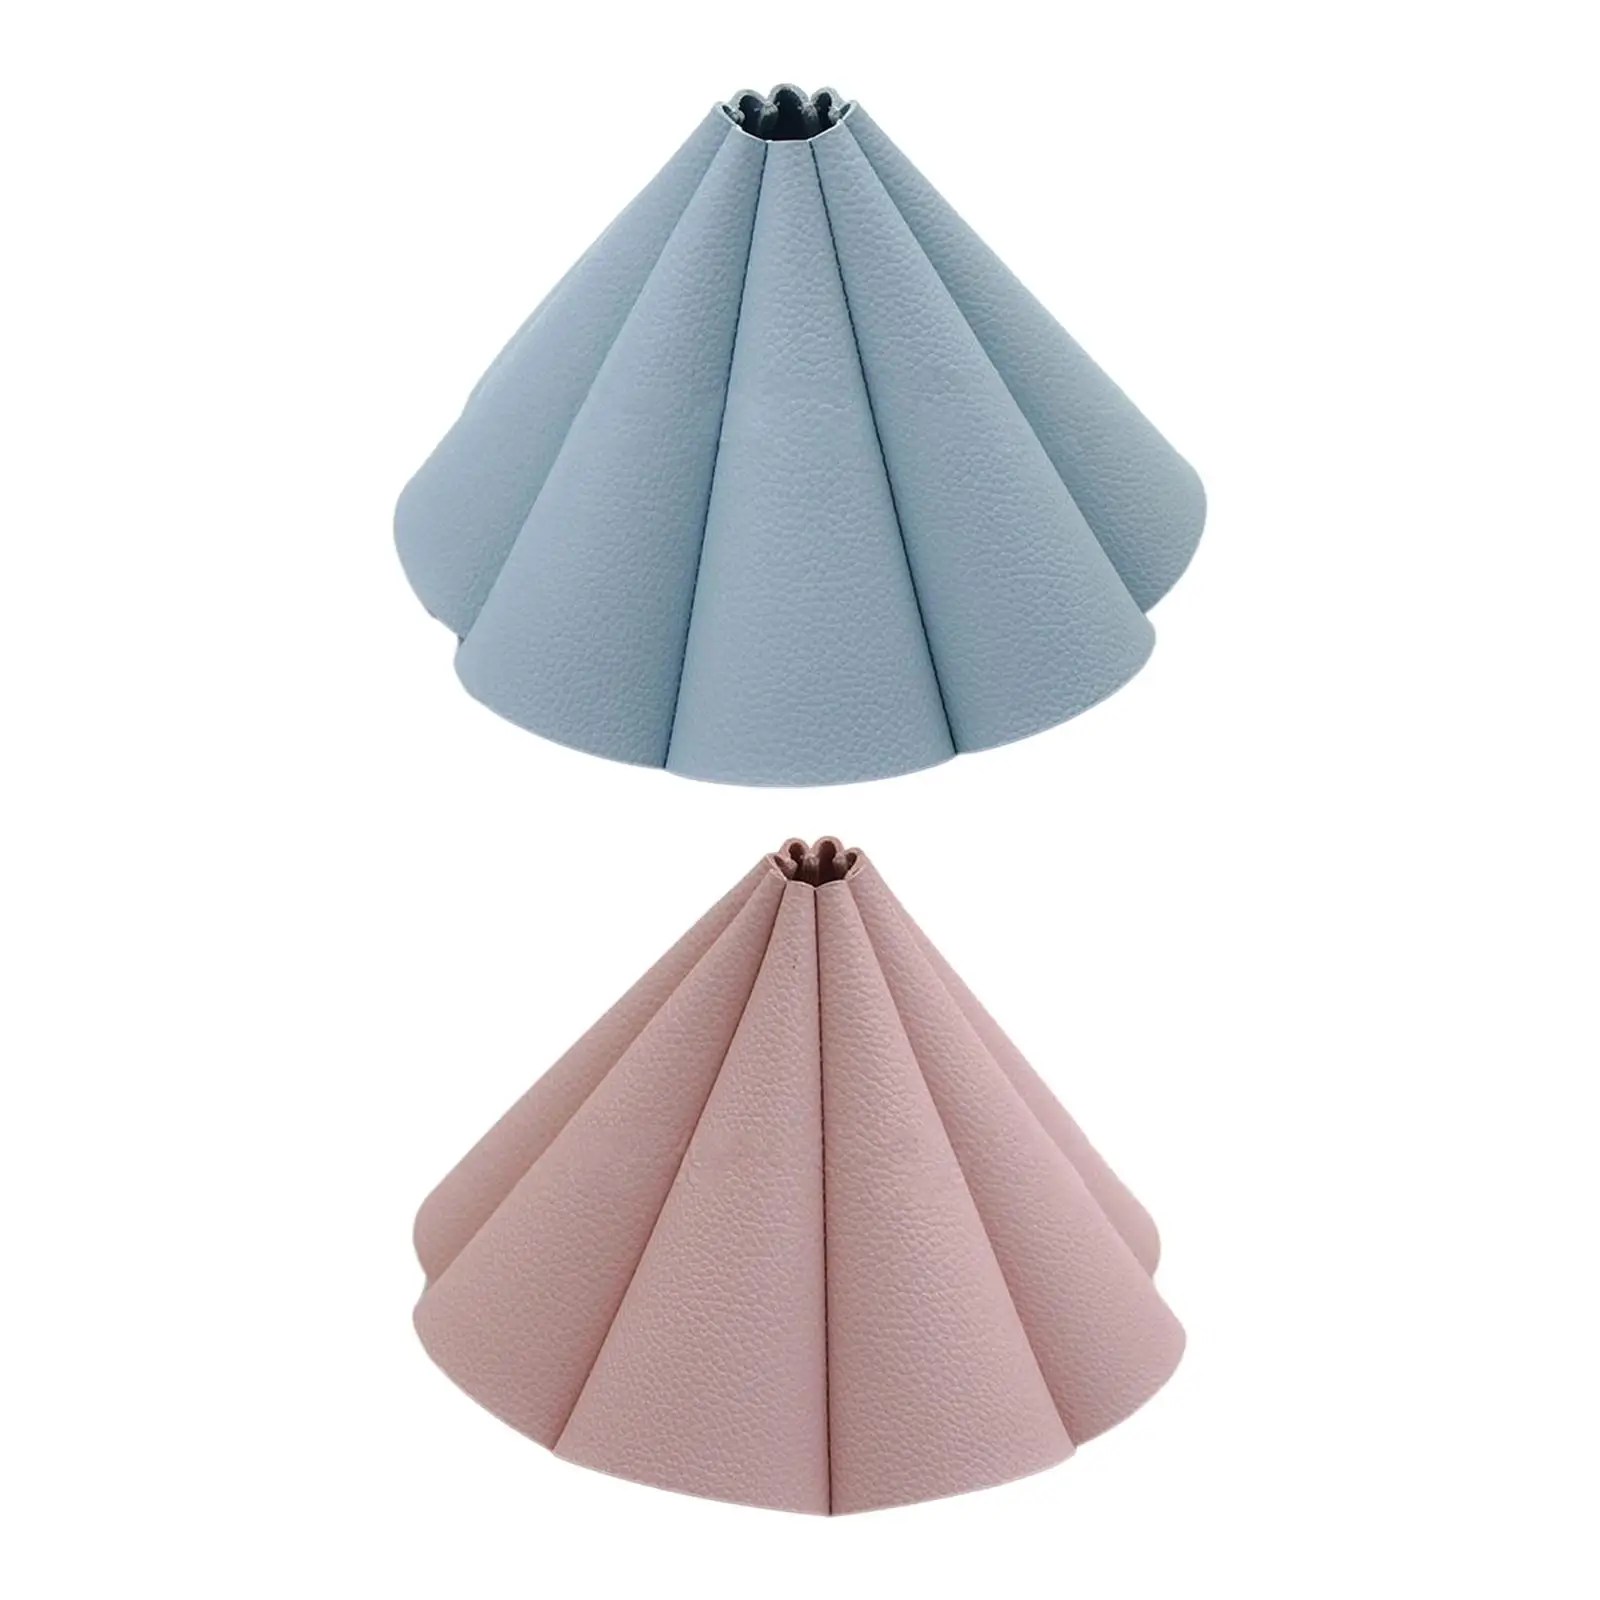 Modern Leather Waterproof Decoration Dustproof Lamp Cover Replacement Detachable Compatible Vintage Hardback Lampshade for Home